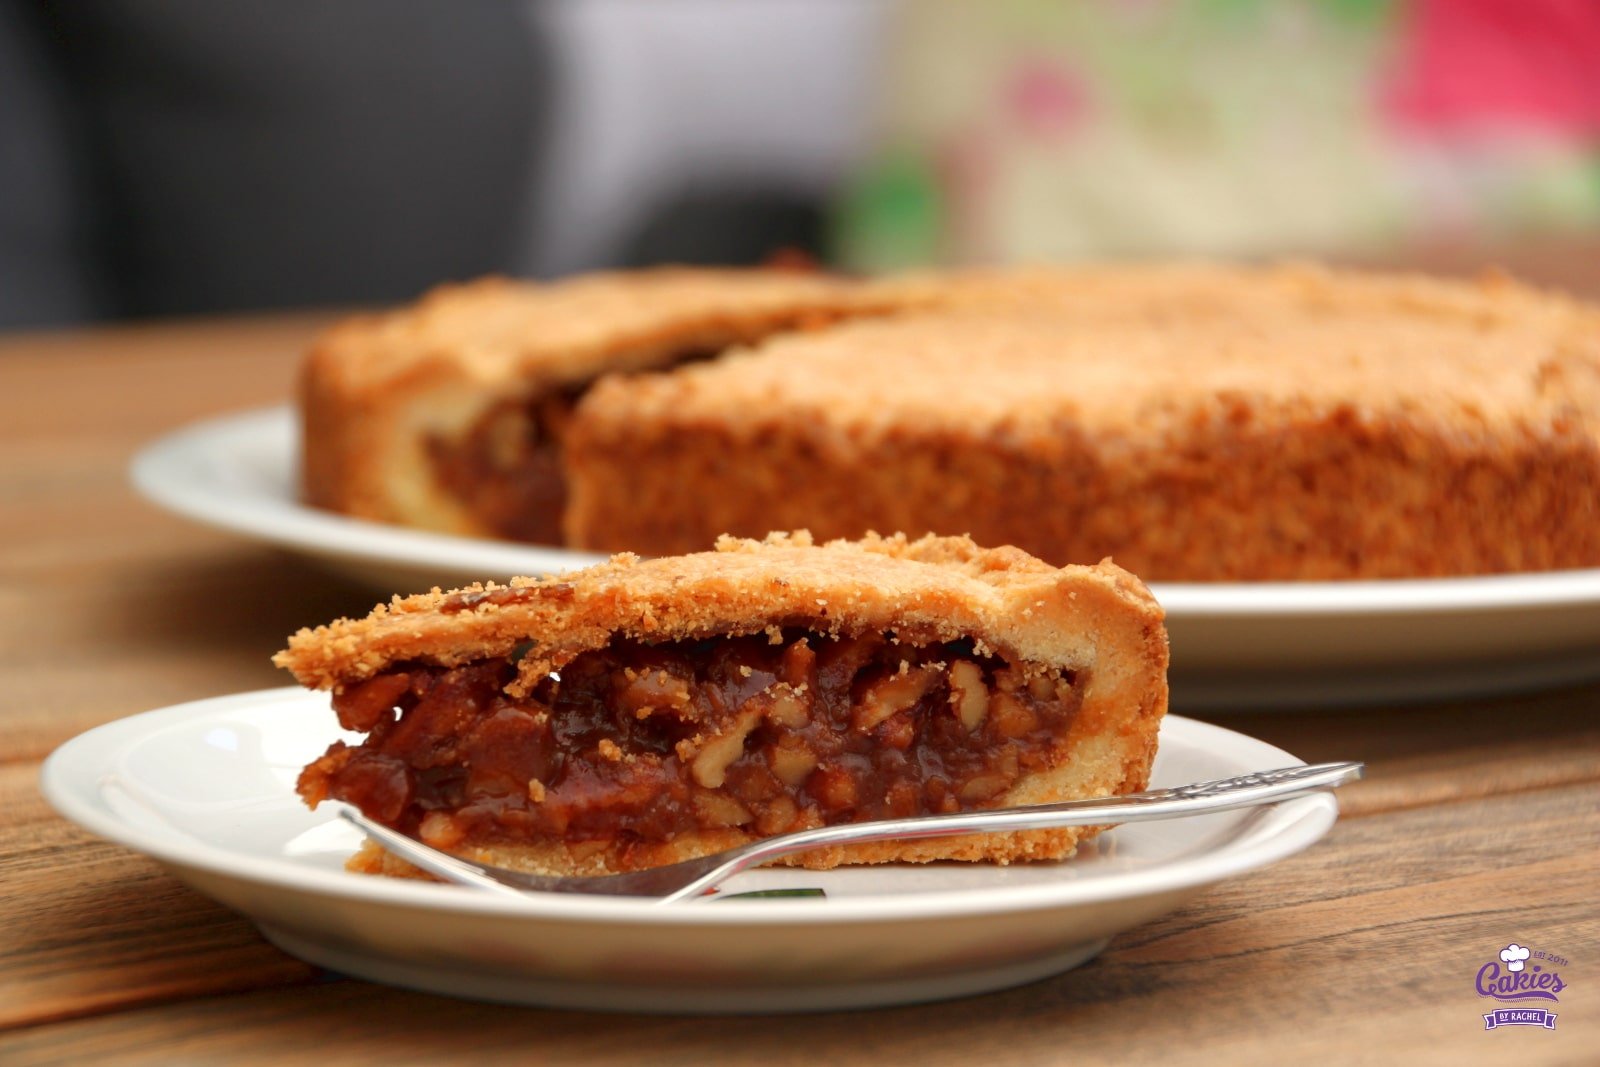 Engadiner Nusstorte Recipe - Swiss Nut Tart | A recipe for Engadiner Nusstorte, a Swiss nut tart. Shortcut pastry filled with walnuts covered in a thick caramel sauce. A real treat. | http://www.cakieshq.com | Step 24